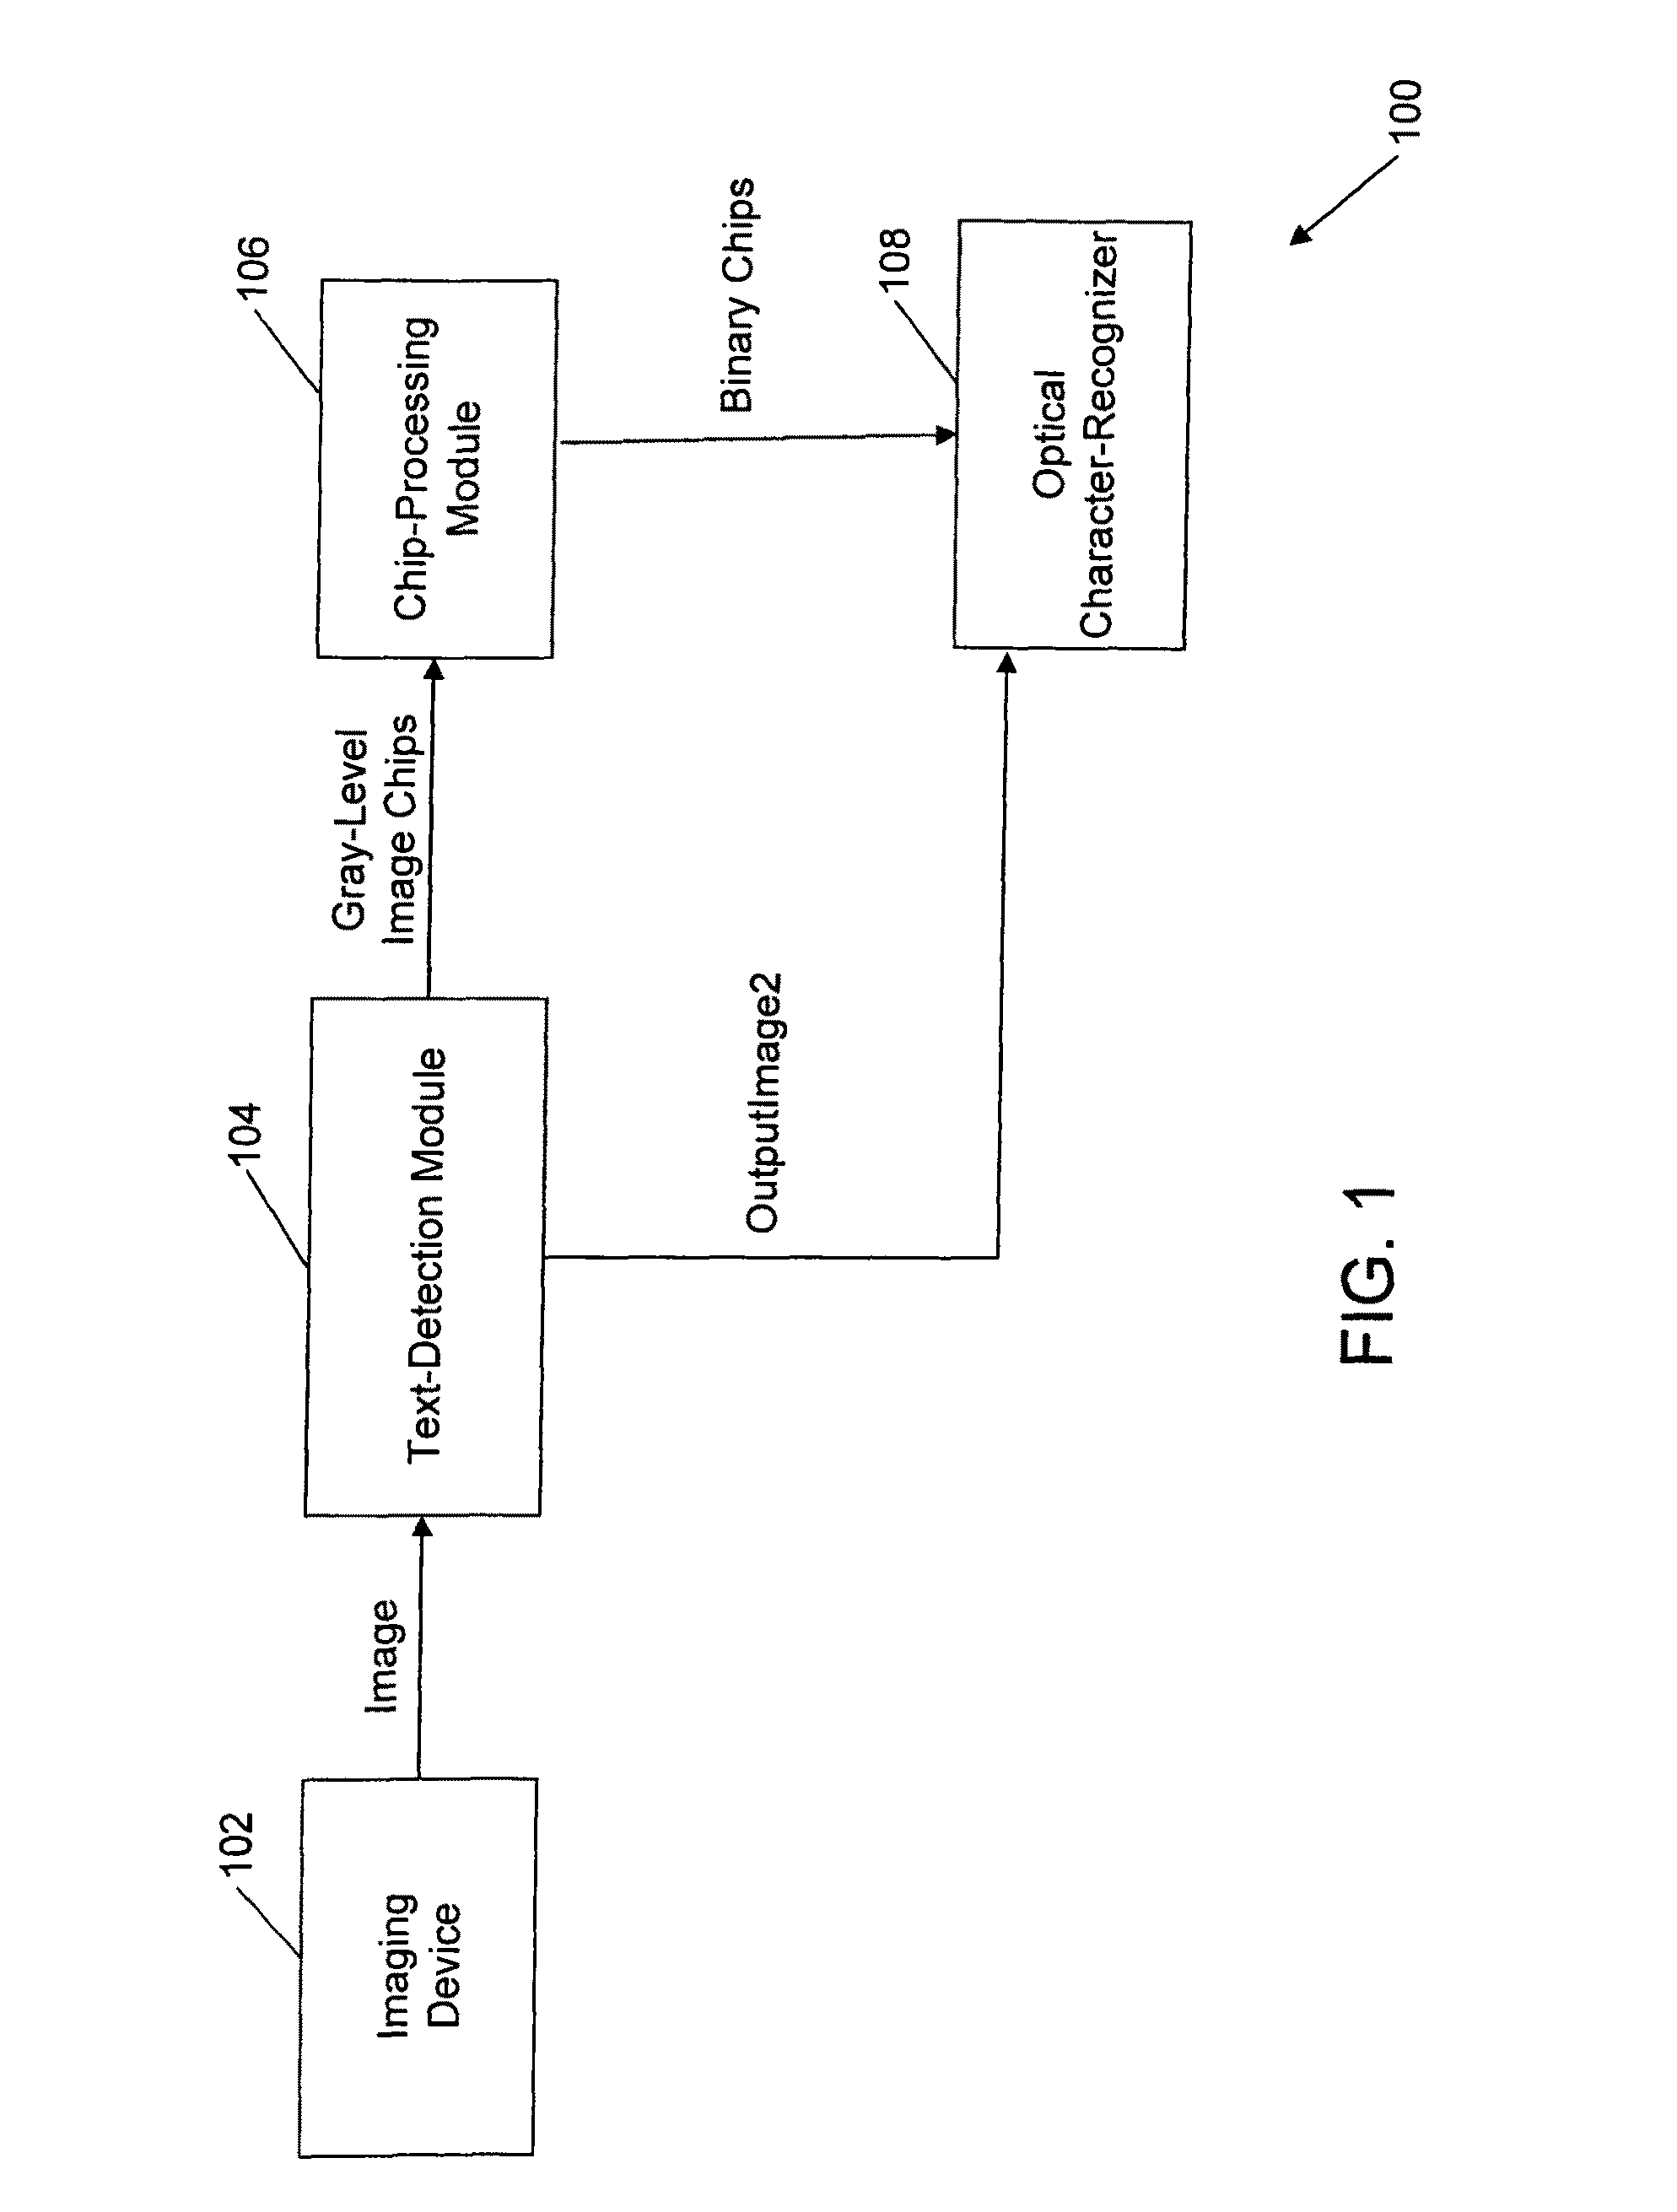 Method and system for detecting and recognizing text in images